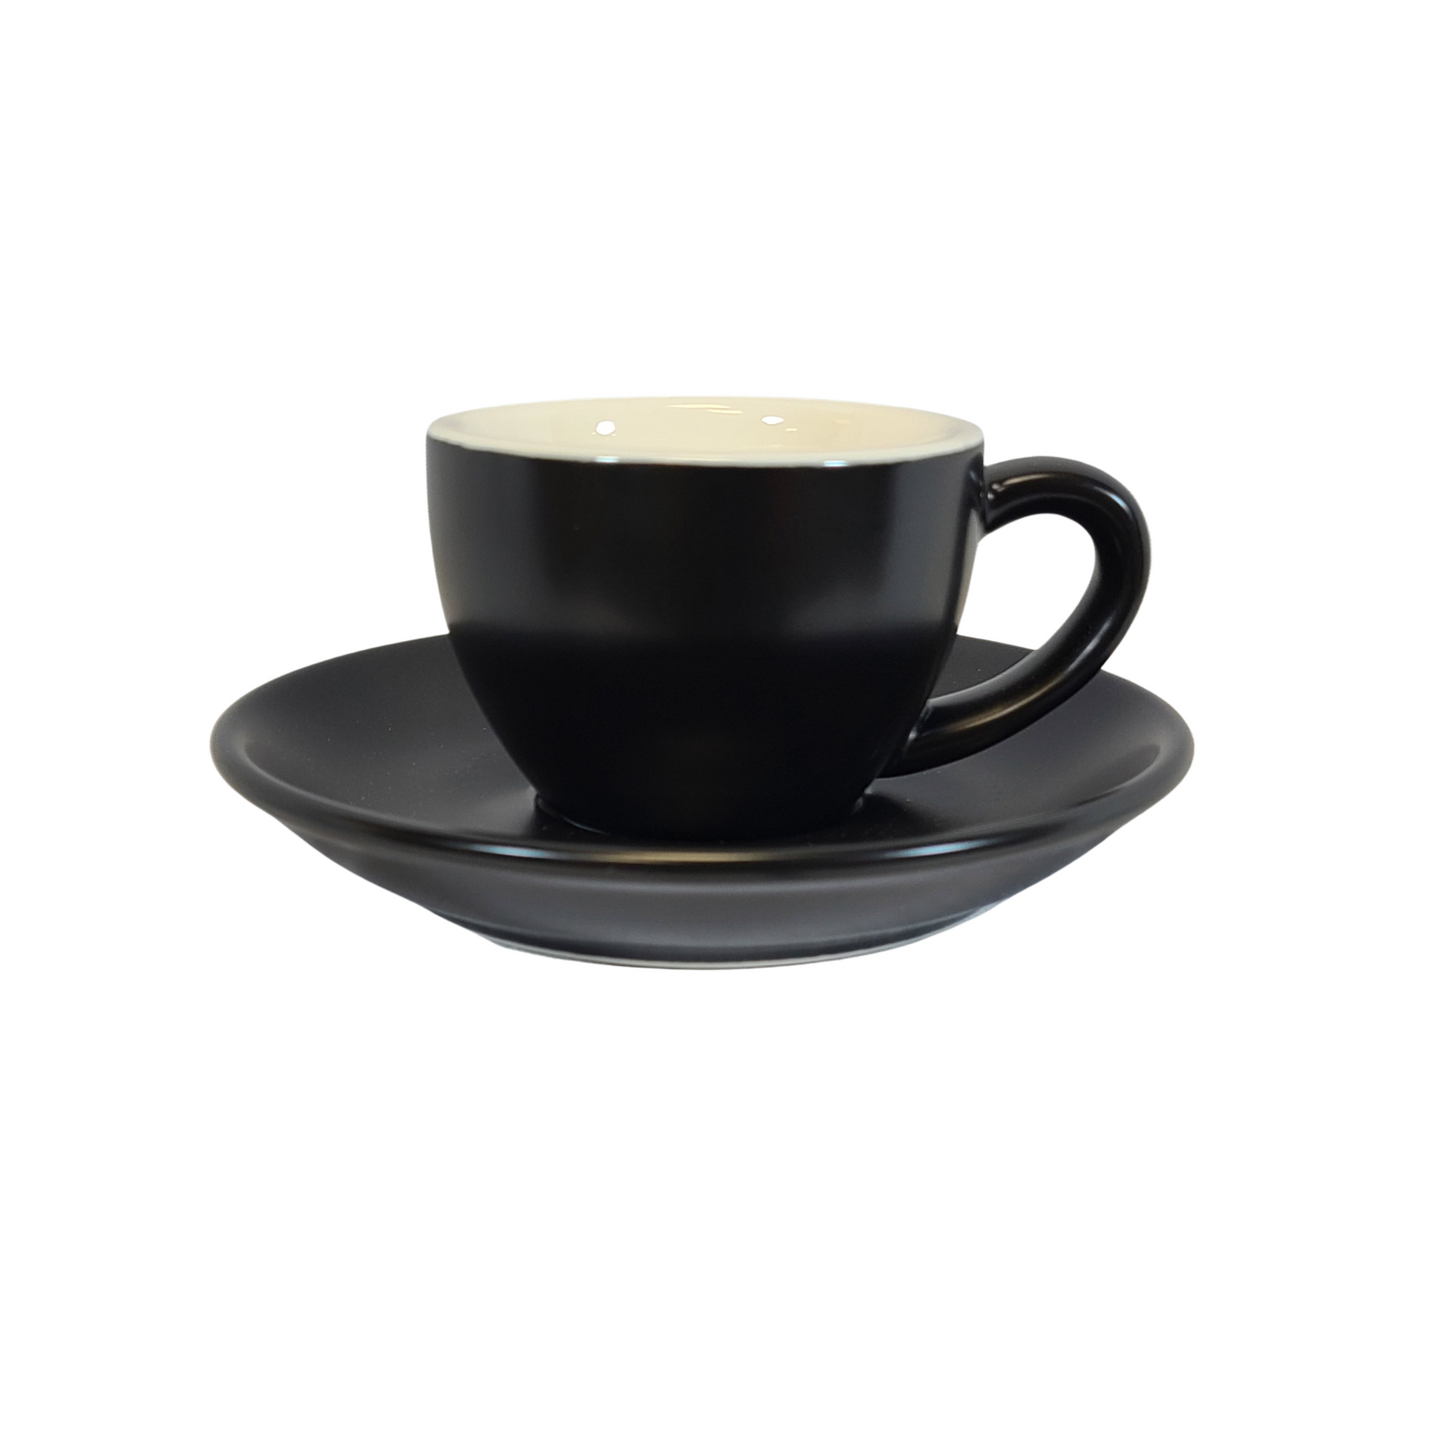 Coffee Addicts commercial ceramic cup with saucer in matte black espresso cup 2.7oz 80ml